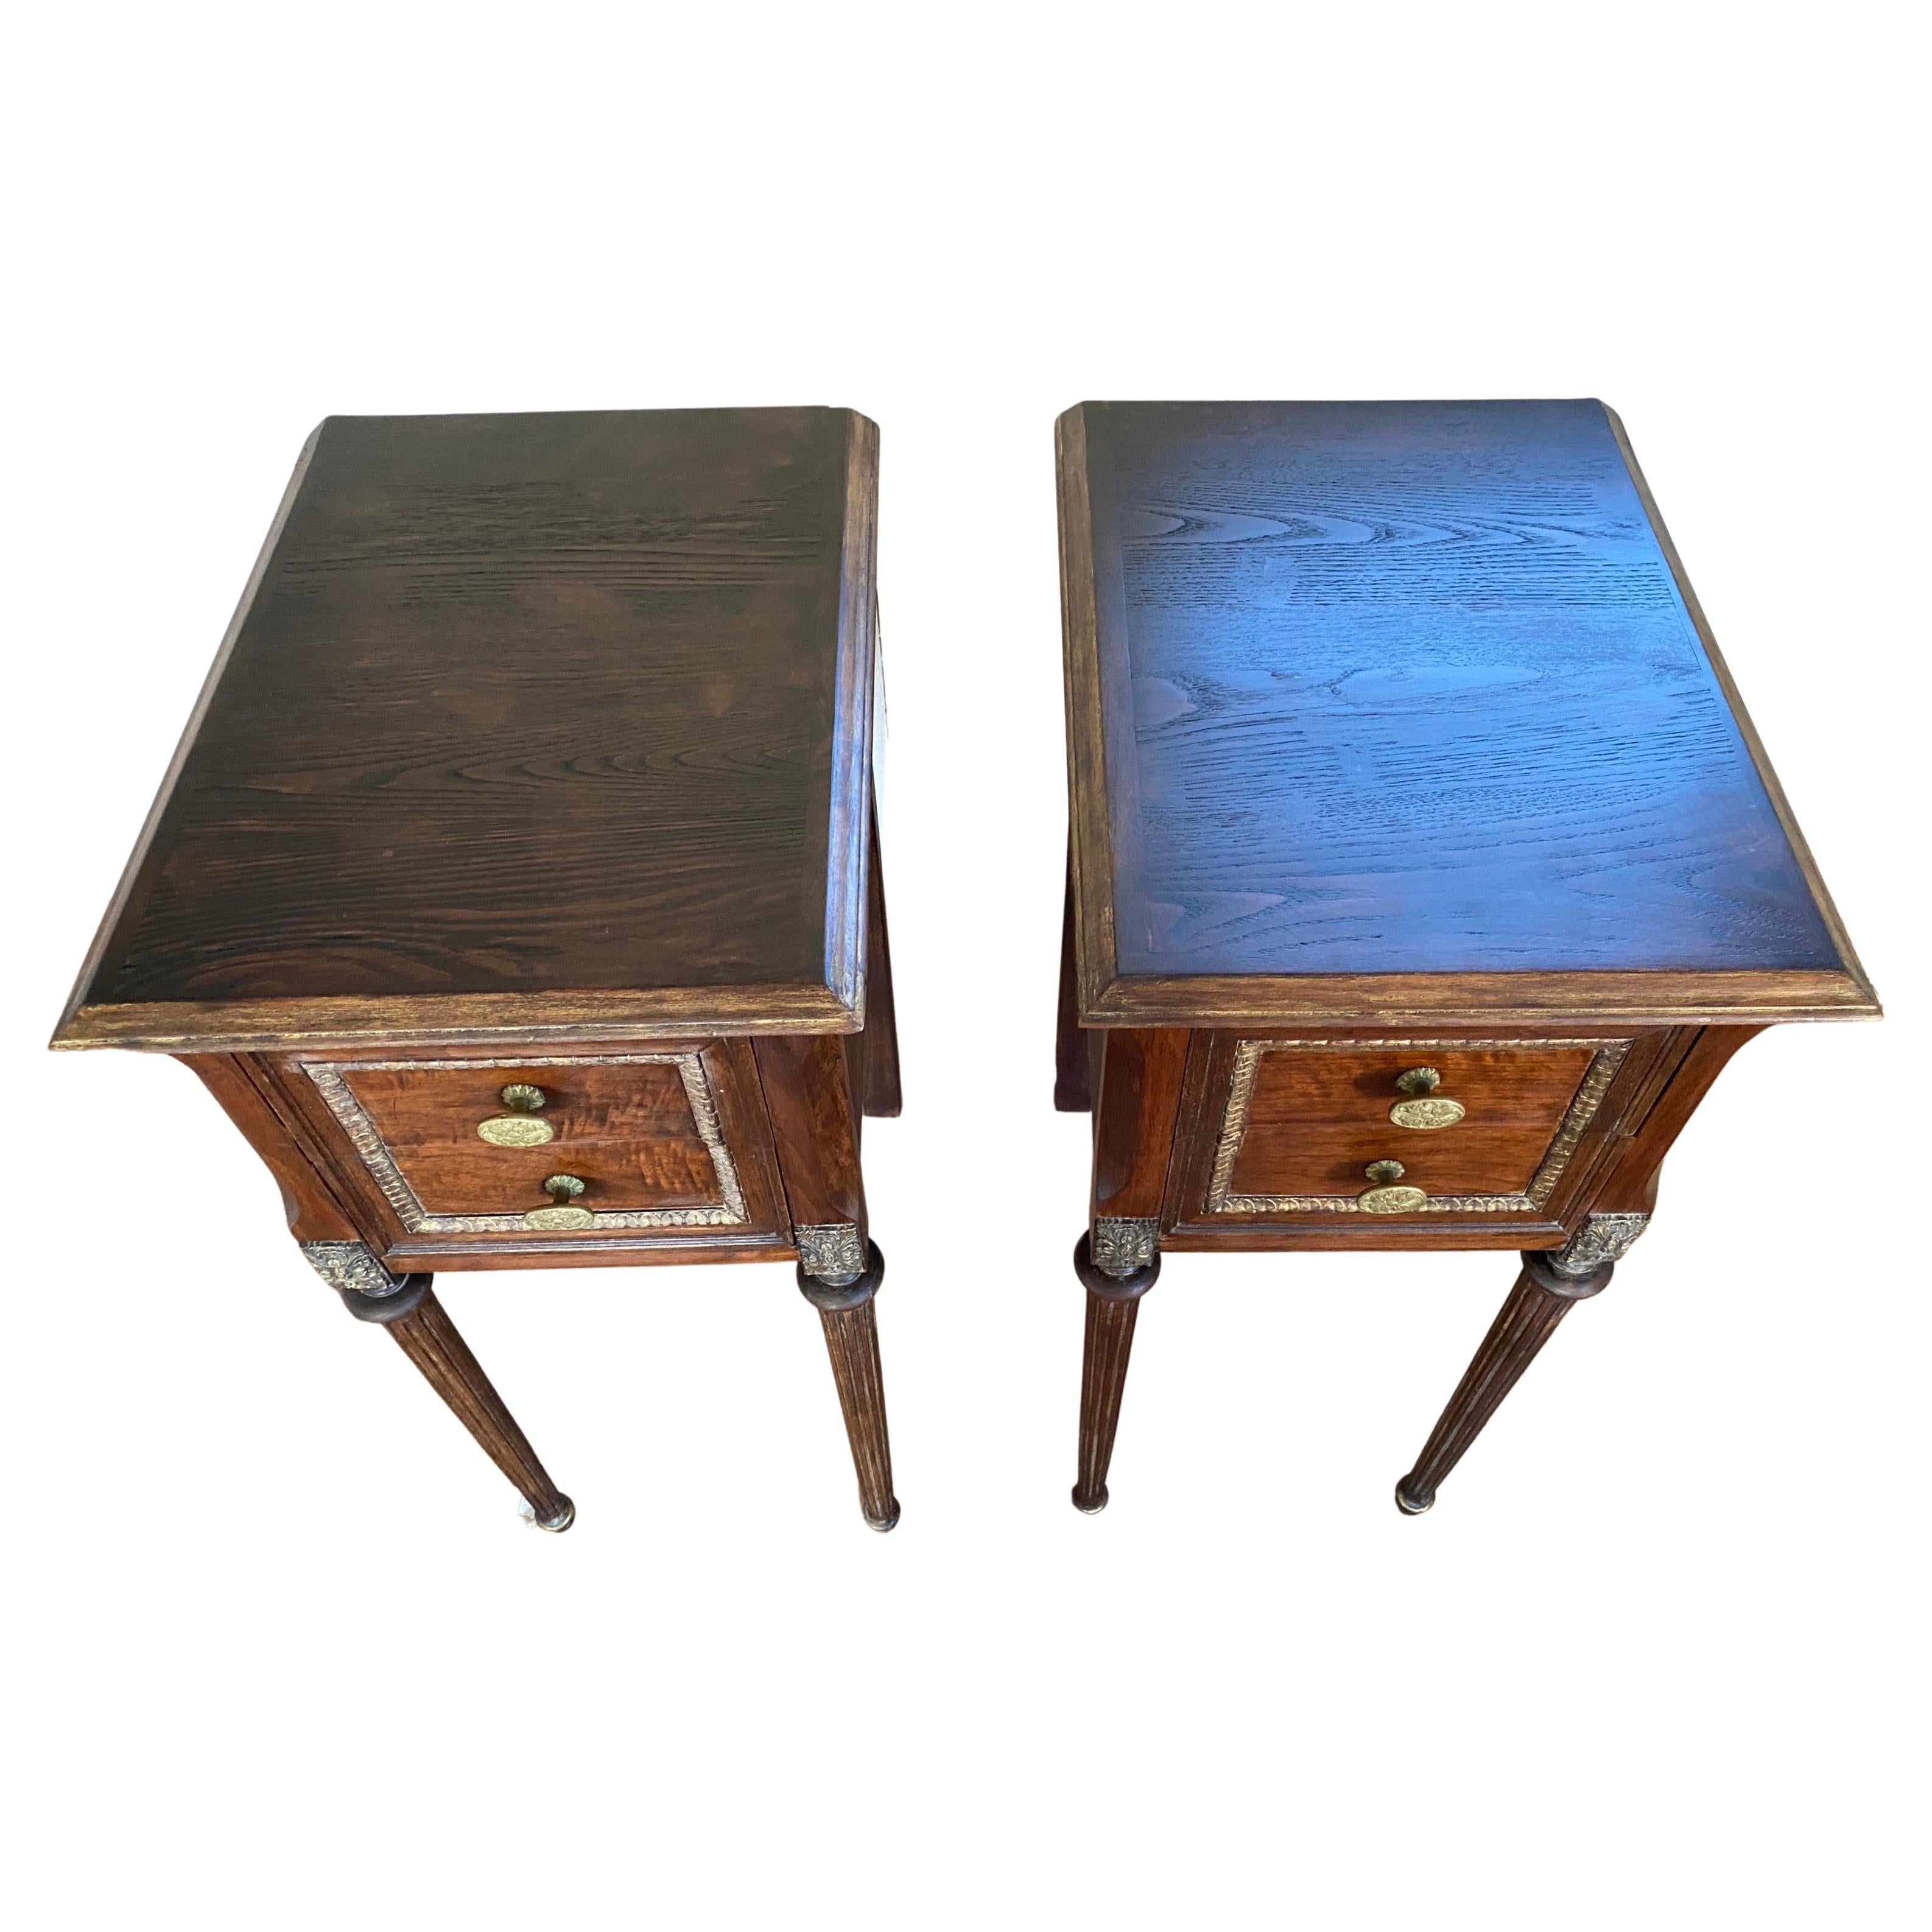 A pair of smart Louis XVI style nightstands or bedside end tables with gilded decorative accents. The stands each have two drawer with brass knobs top. The gold toned accents adds extra style and elegance to these stands.

 